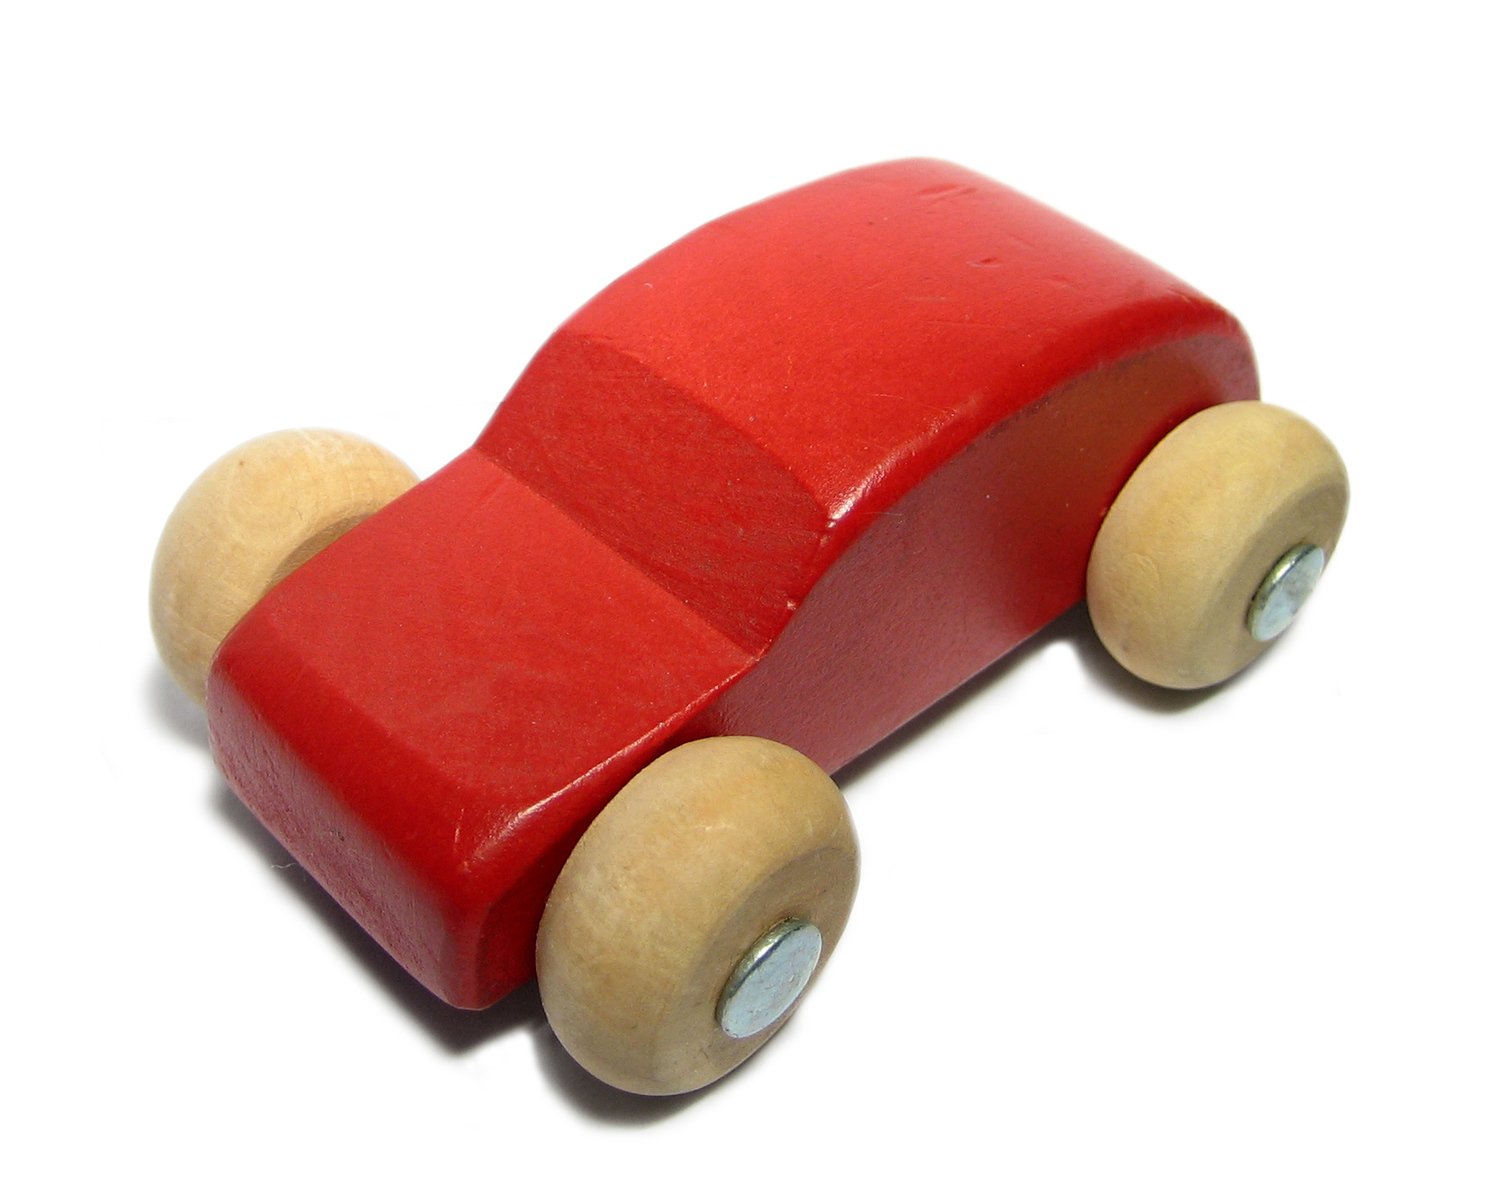 a toy wooden car is displayed on a white background